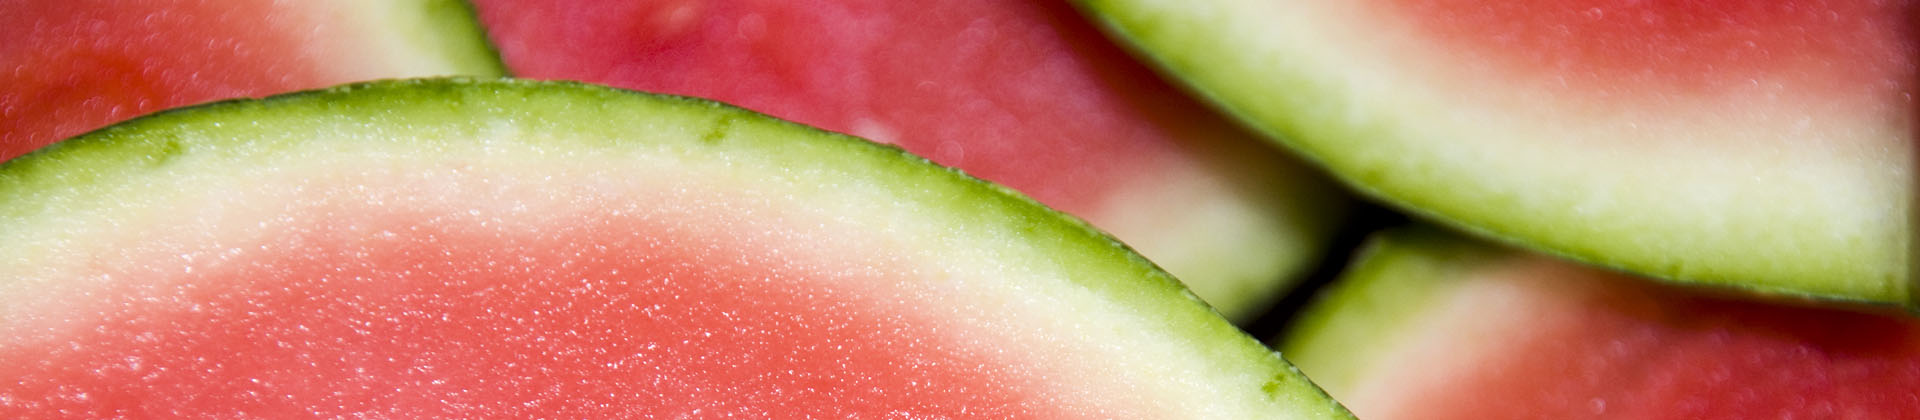 Close up of watermelon slices, you only see the top with a green border and then white and then the red flesh